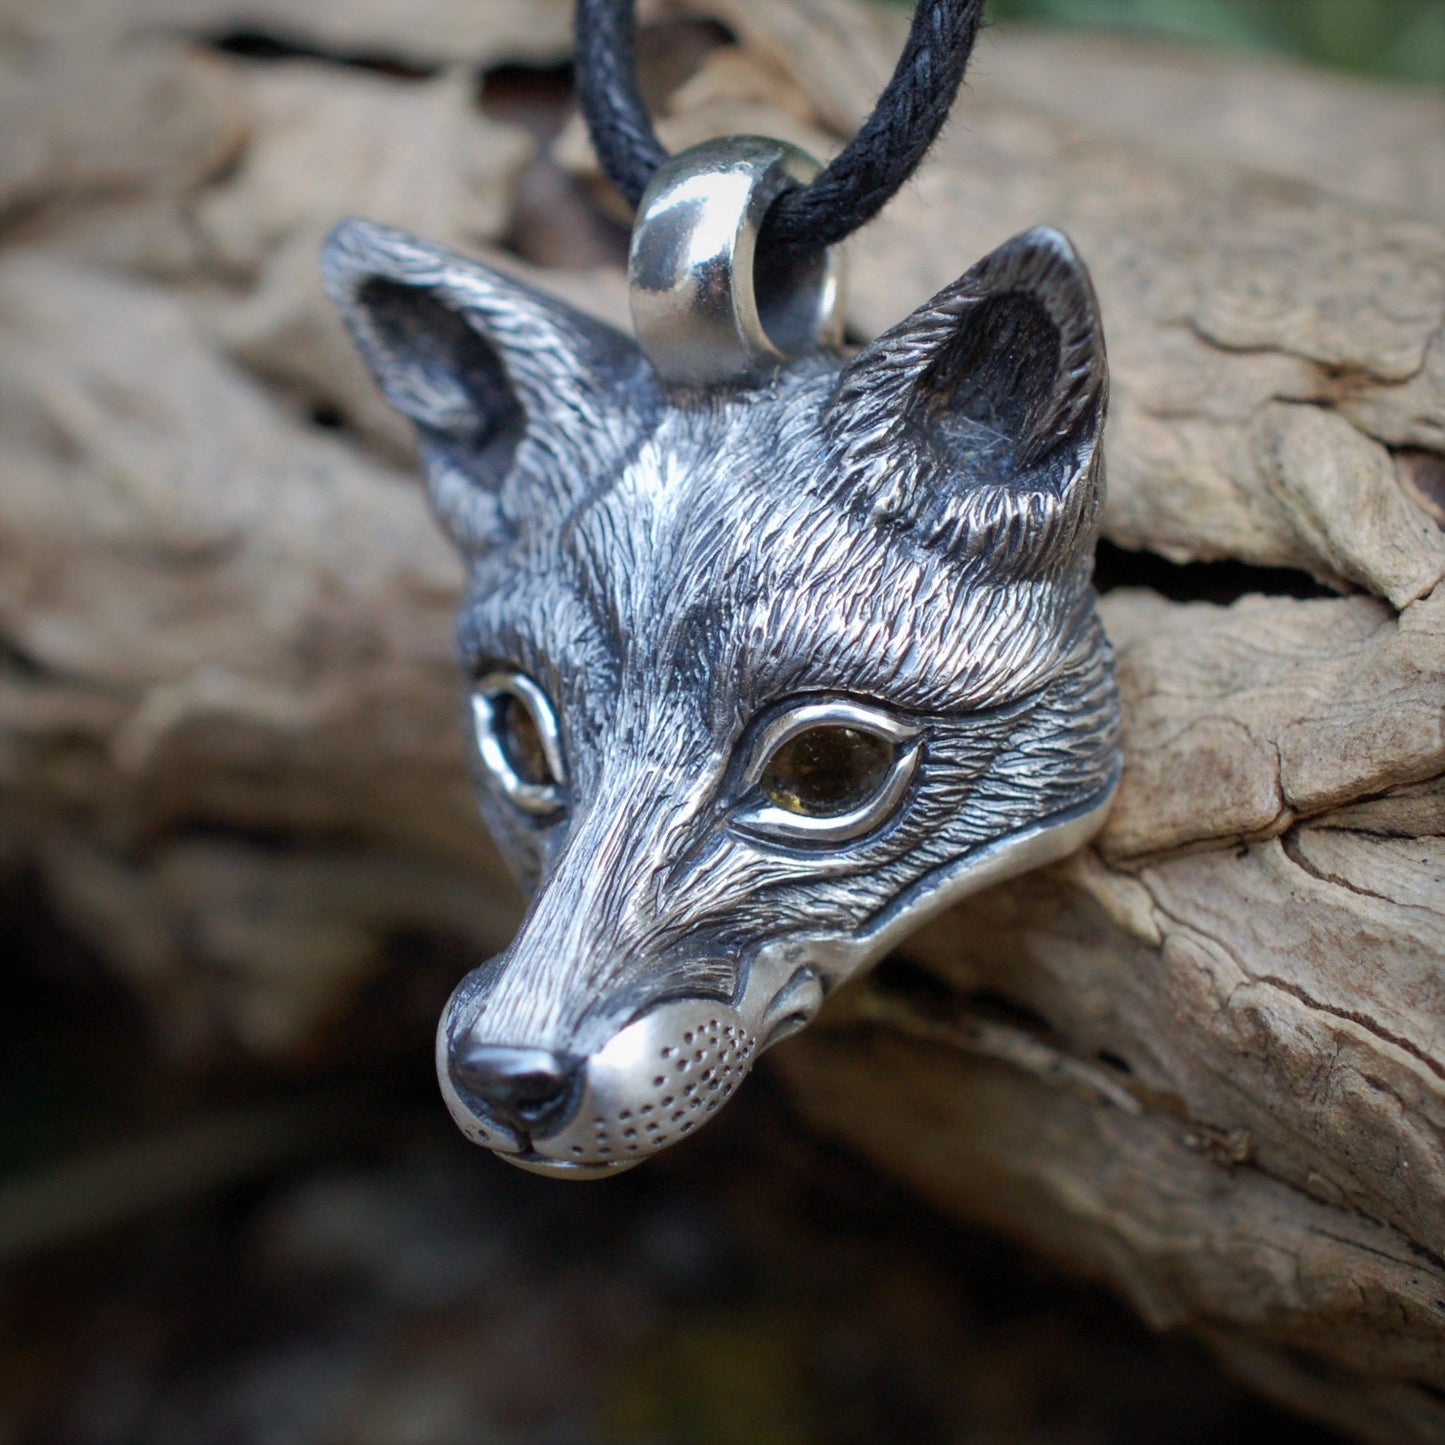 Large Fox Pendant, sterling silver fox head pendant with citrine eye. Hand made to order. © Adrian Ashley